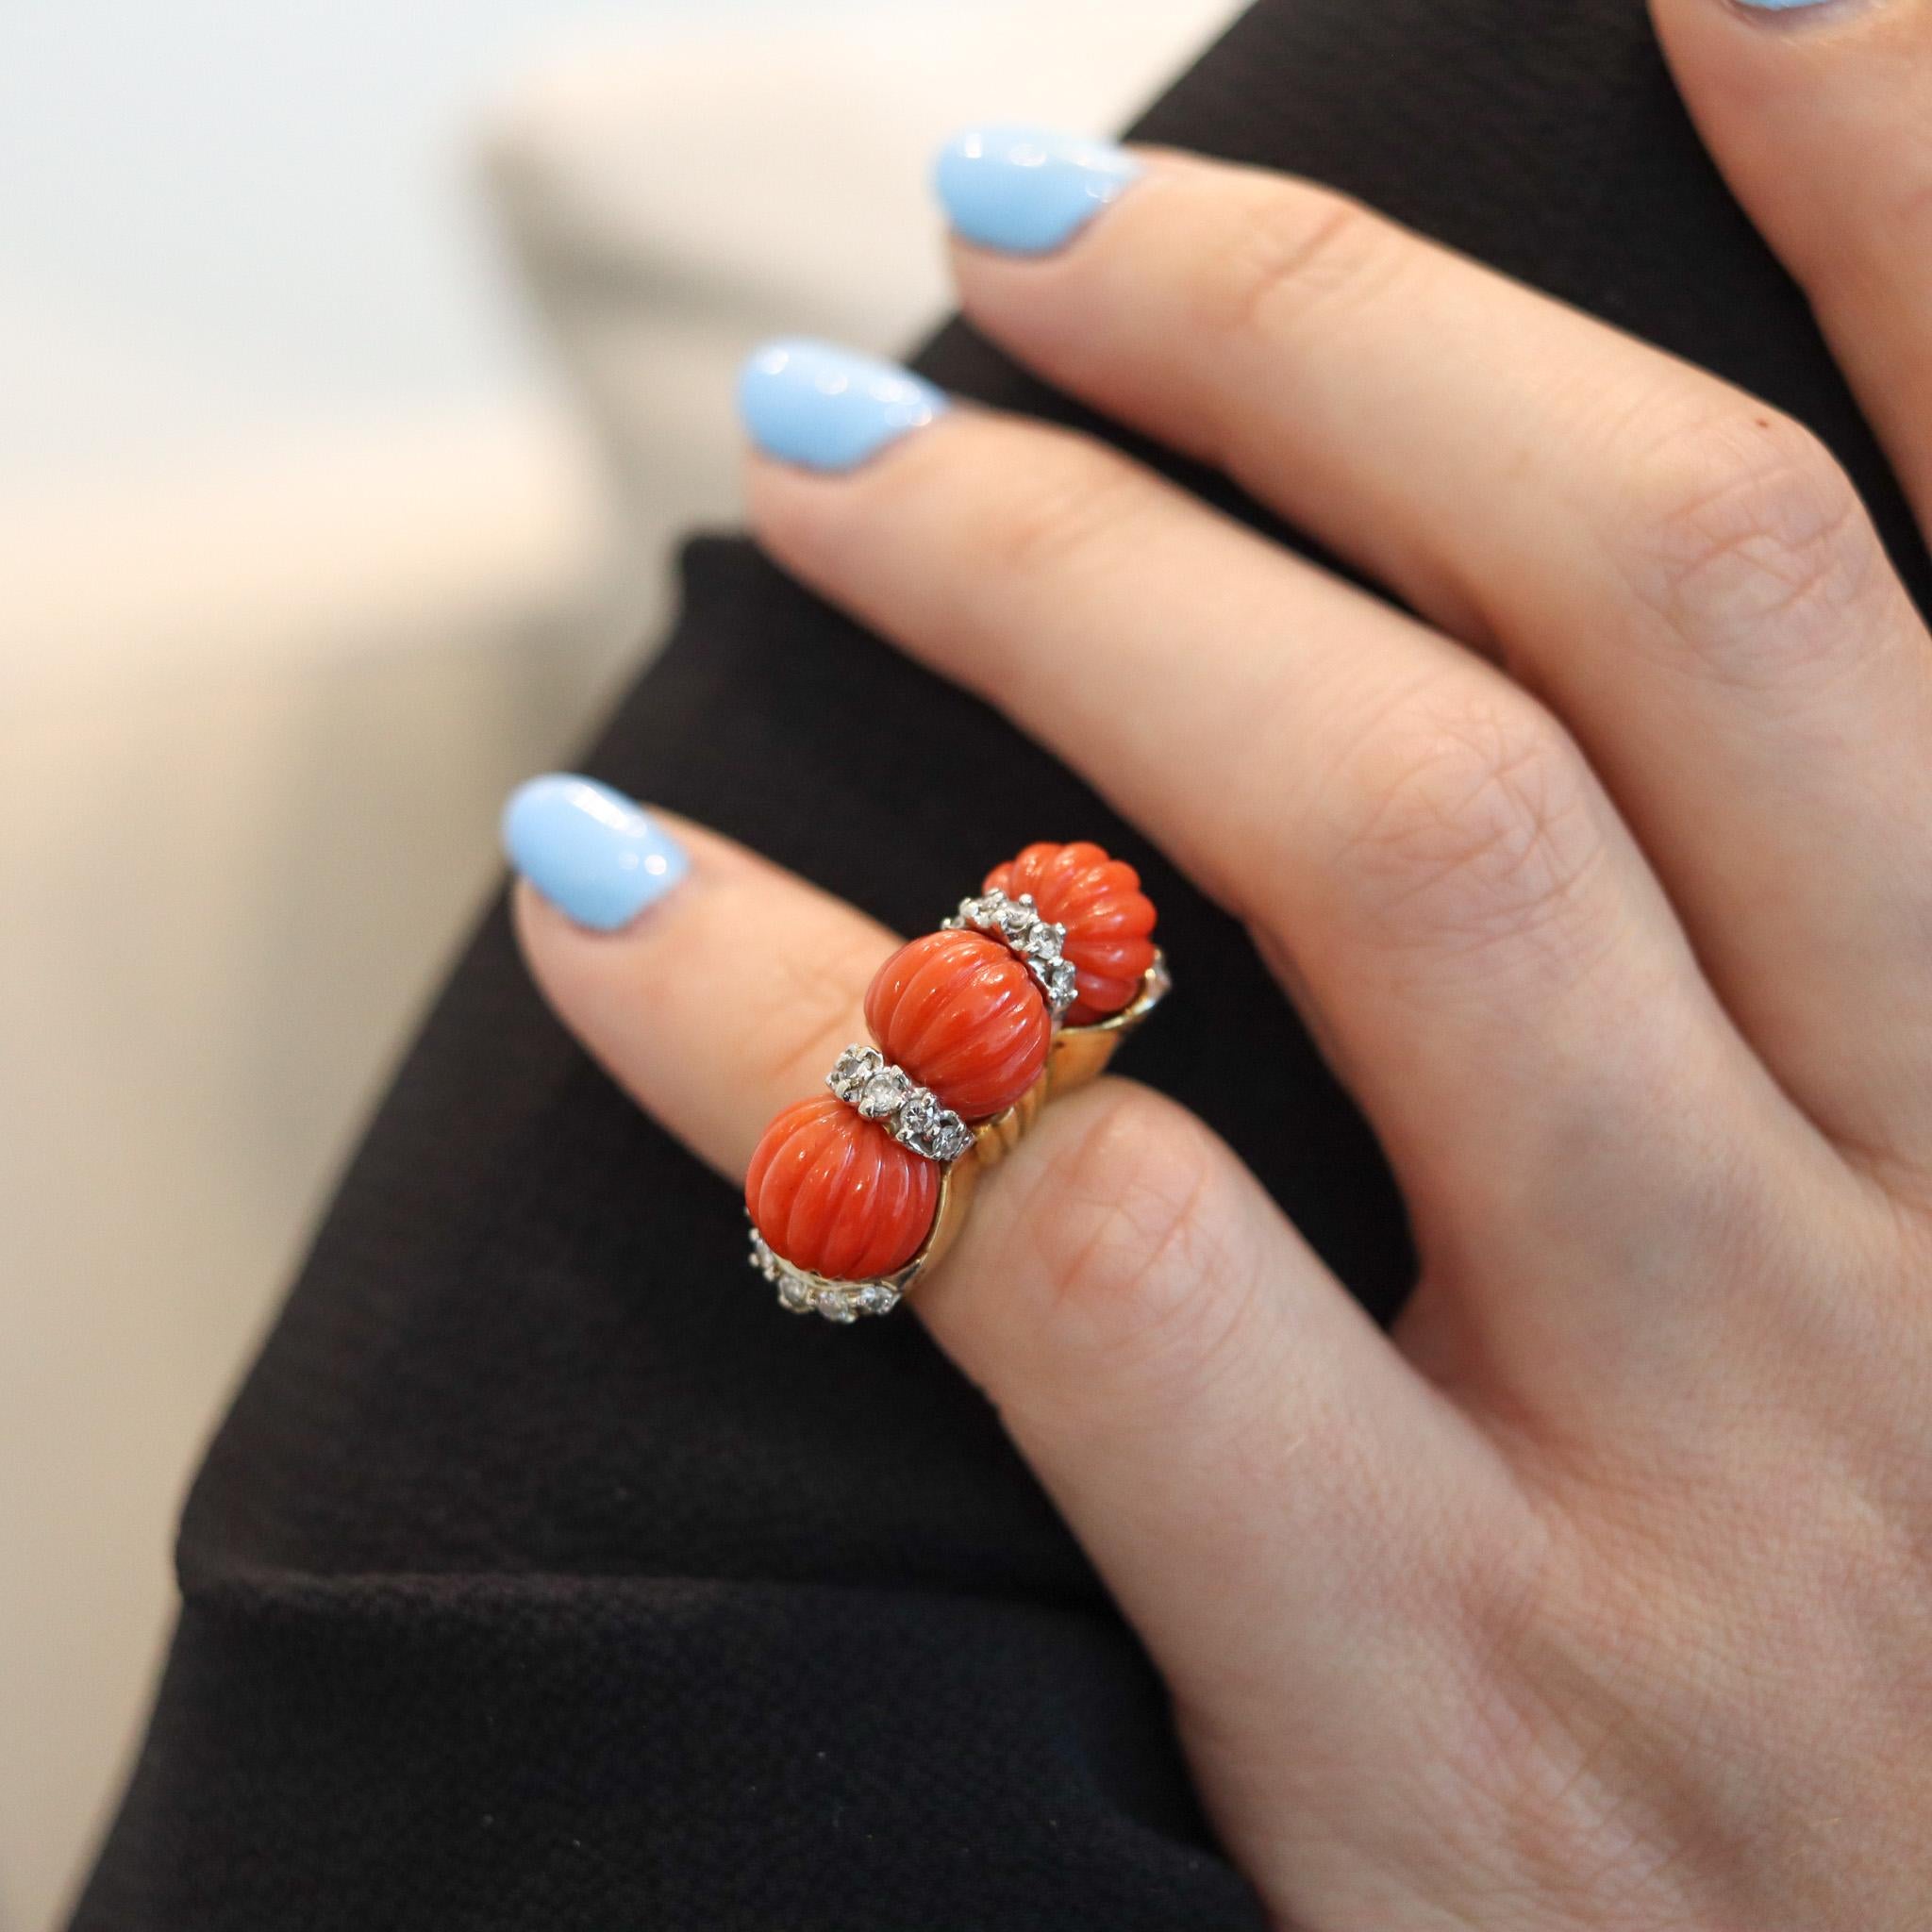 Francesco Passaretta 1970 Fluted Sardinian Coral Ring In 18Kt Gold With Diamonds For Sale 2